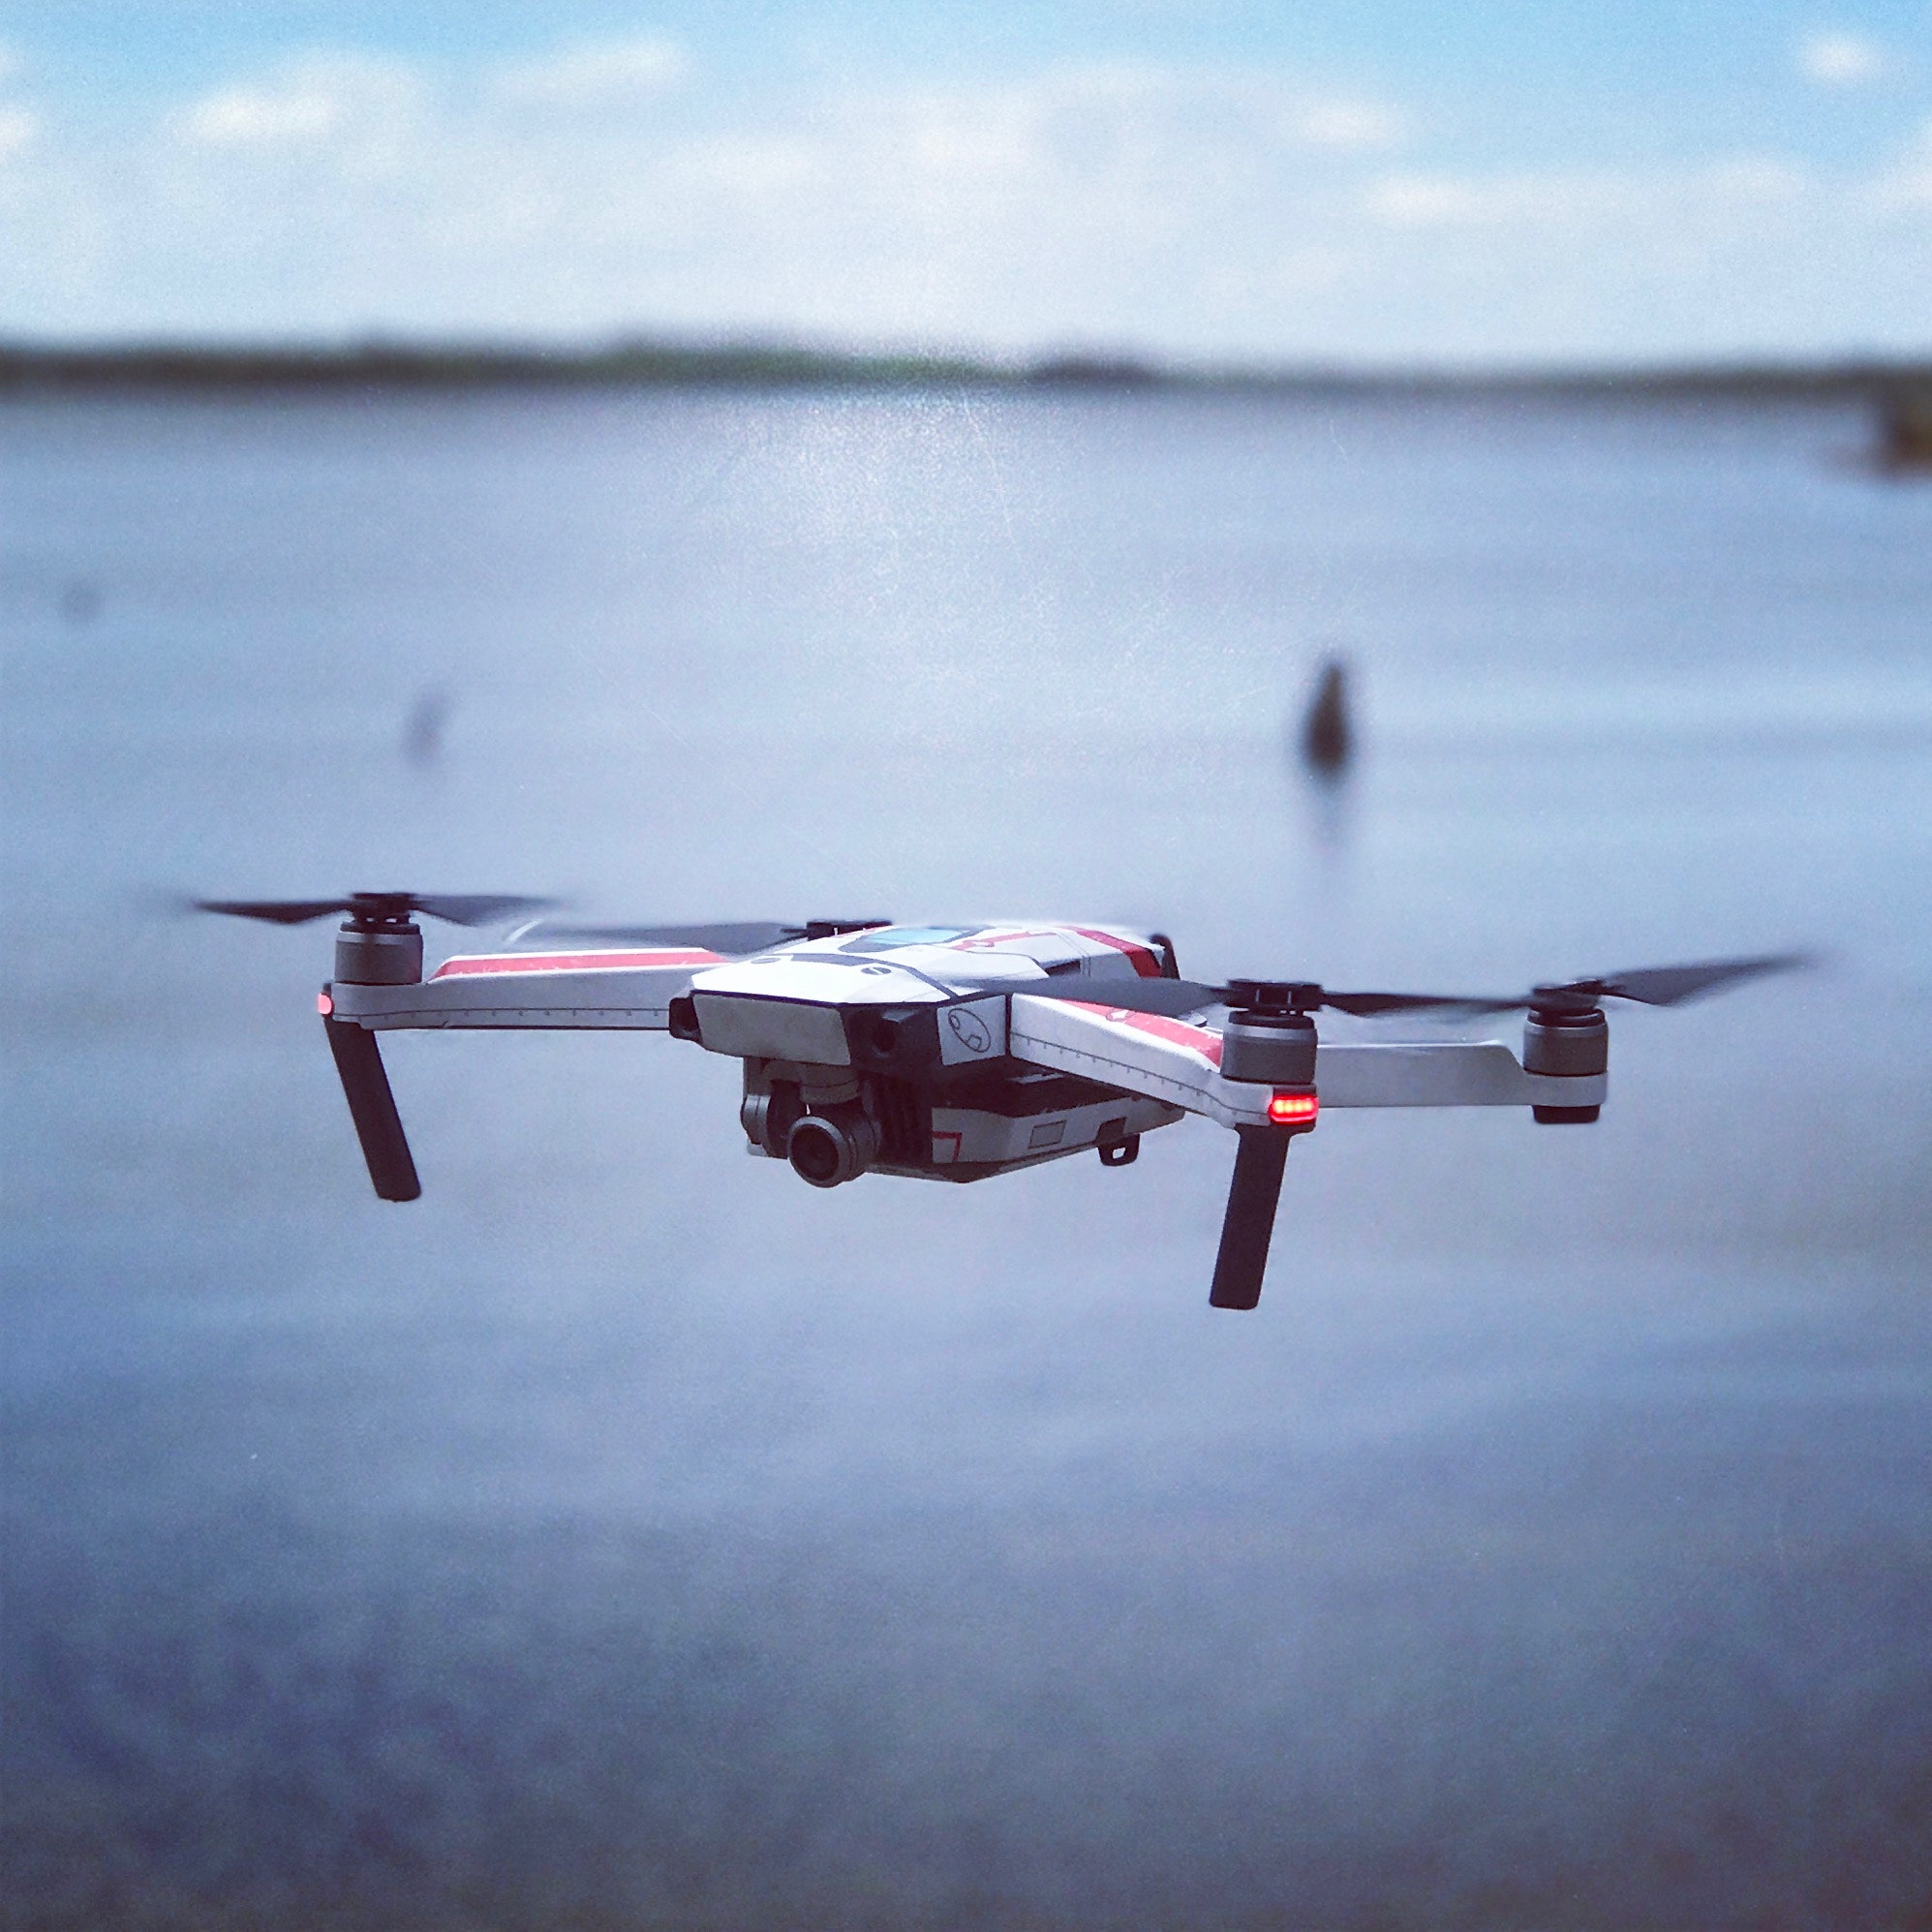 5 Key Safety Tips for Professional UAS Operators